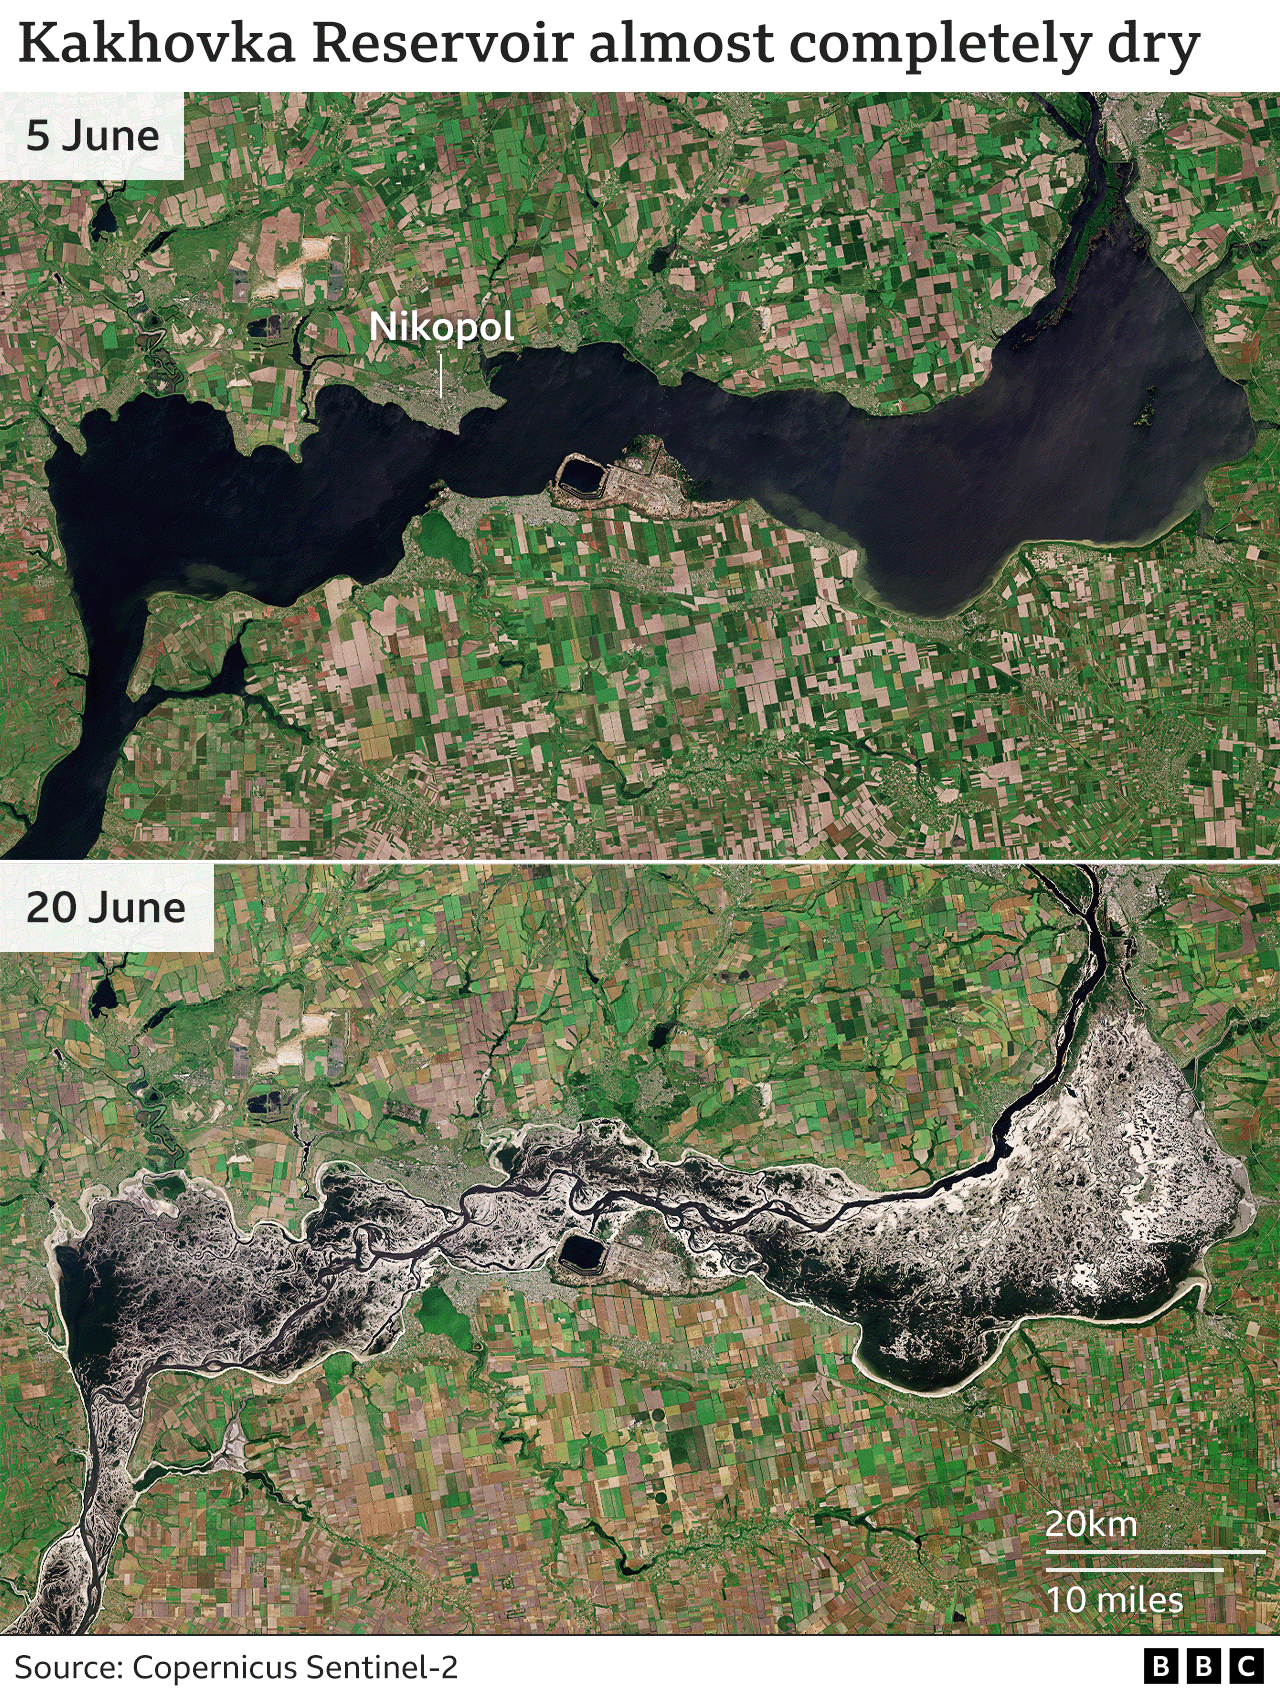 Two images of Kakhovka reservoir, one at 5th June when reservoir was full and another on 20th June when reservoir water levels have dropped significantly